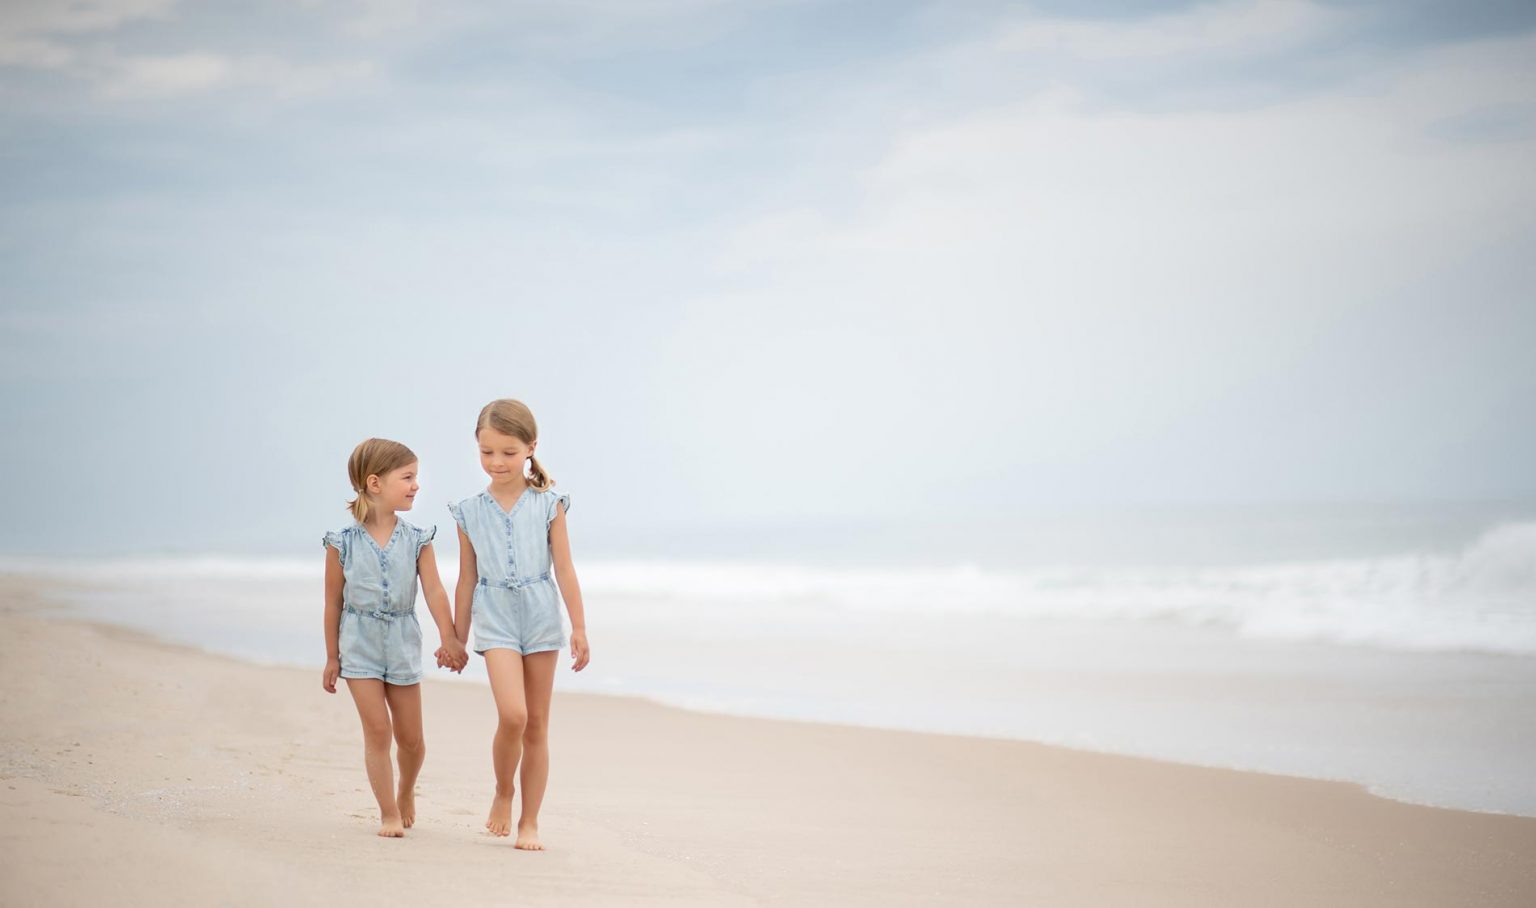 Two young girls holding hands on a beach